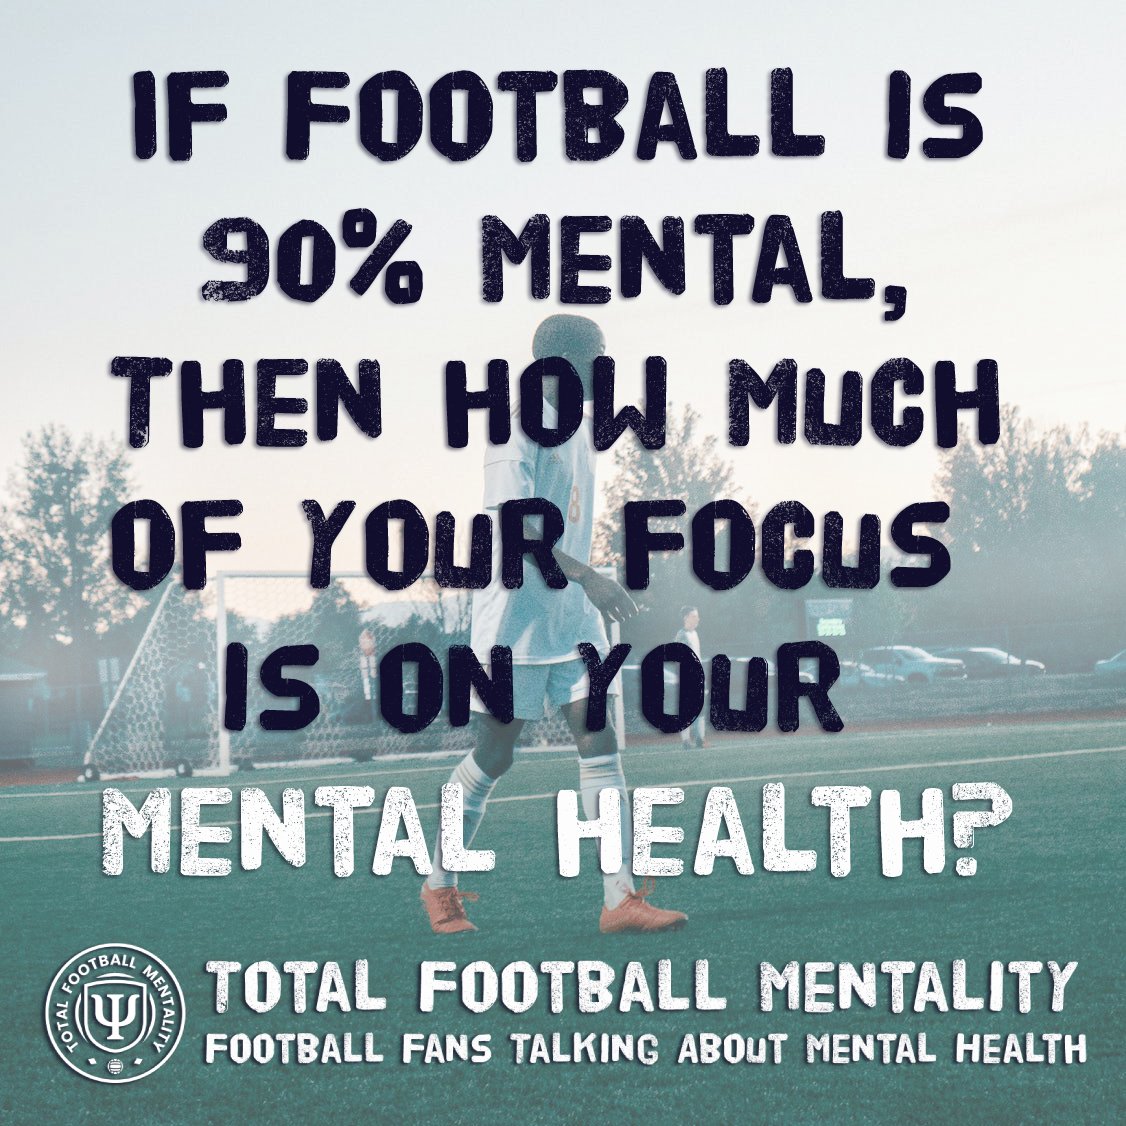 We often focus on the physical fitness involved in football. But how much focus do we put on the mental fitness? How much focus do you put on your own mental health?

#MentalHealth 💚 #Football ⚽️ #MentalHealthIsHealth